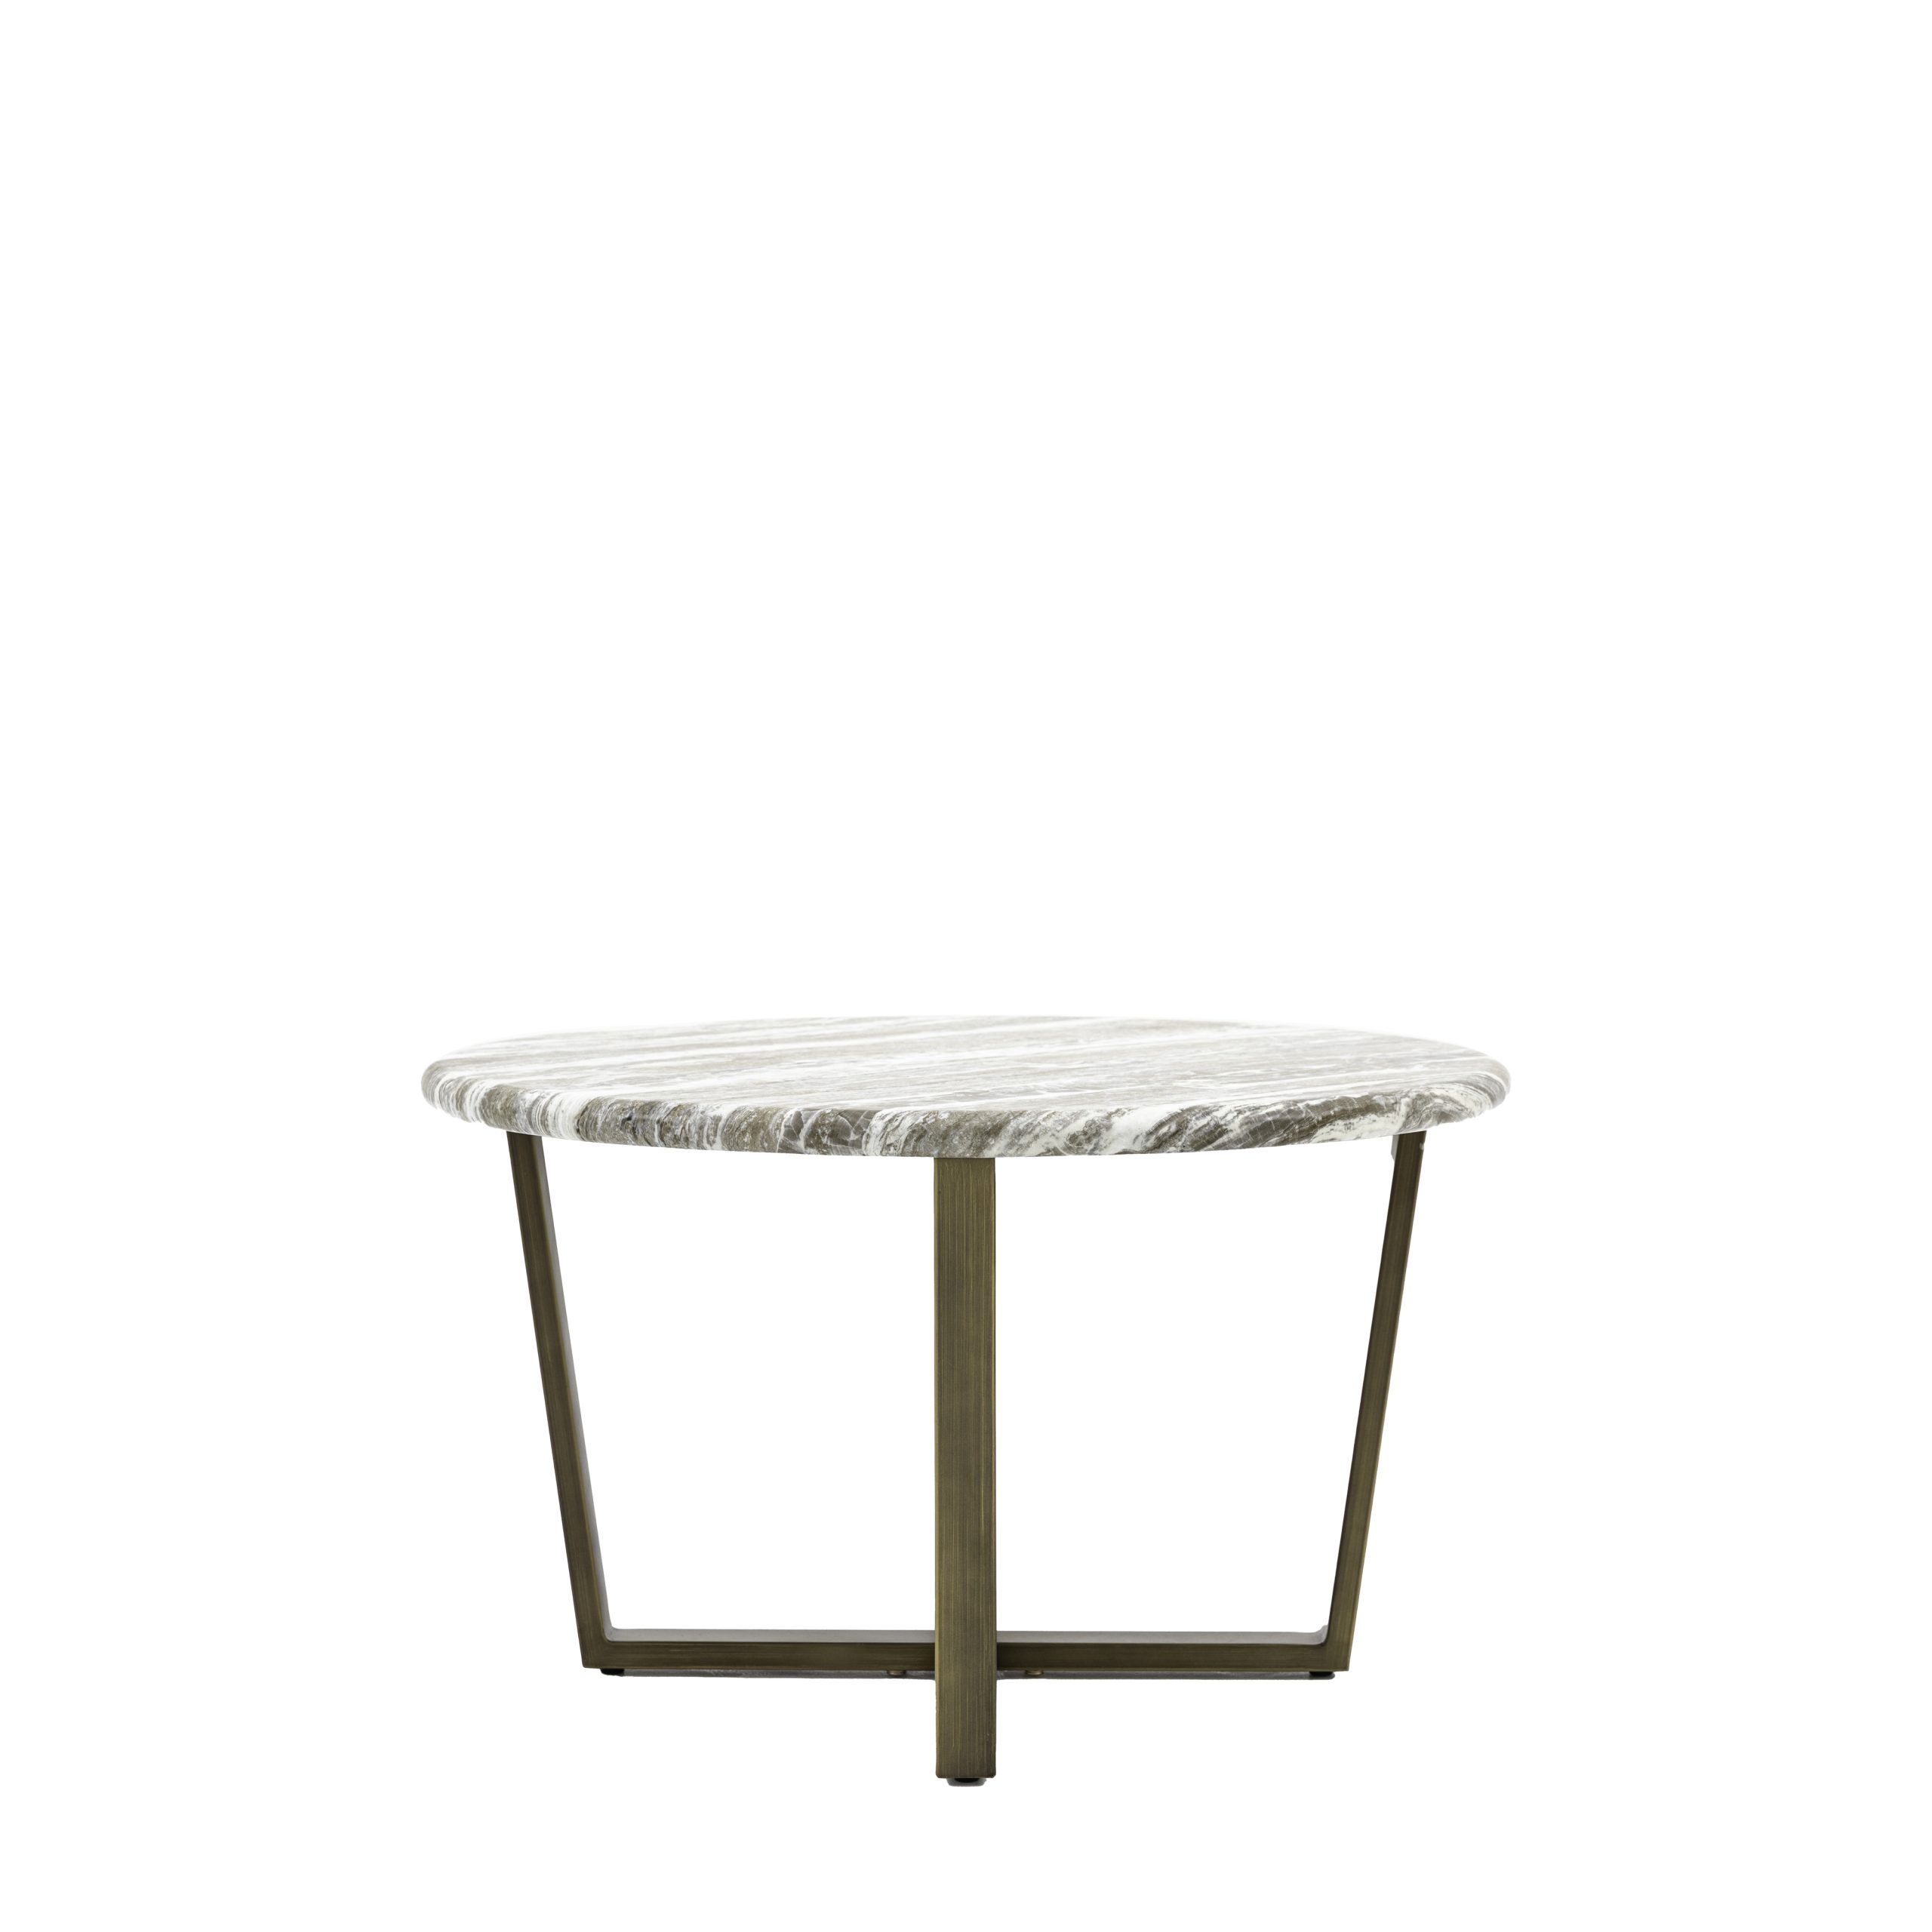 Gallery Direct Lusso Round Coffee Table